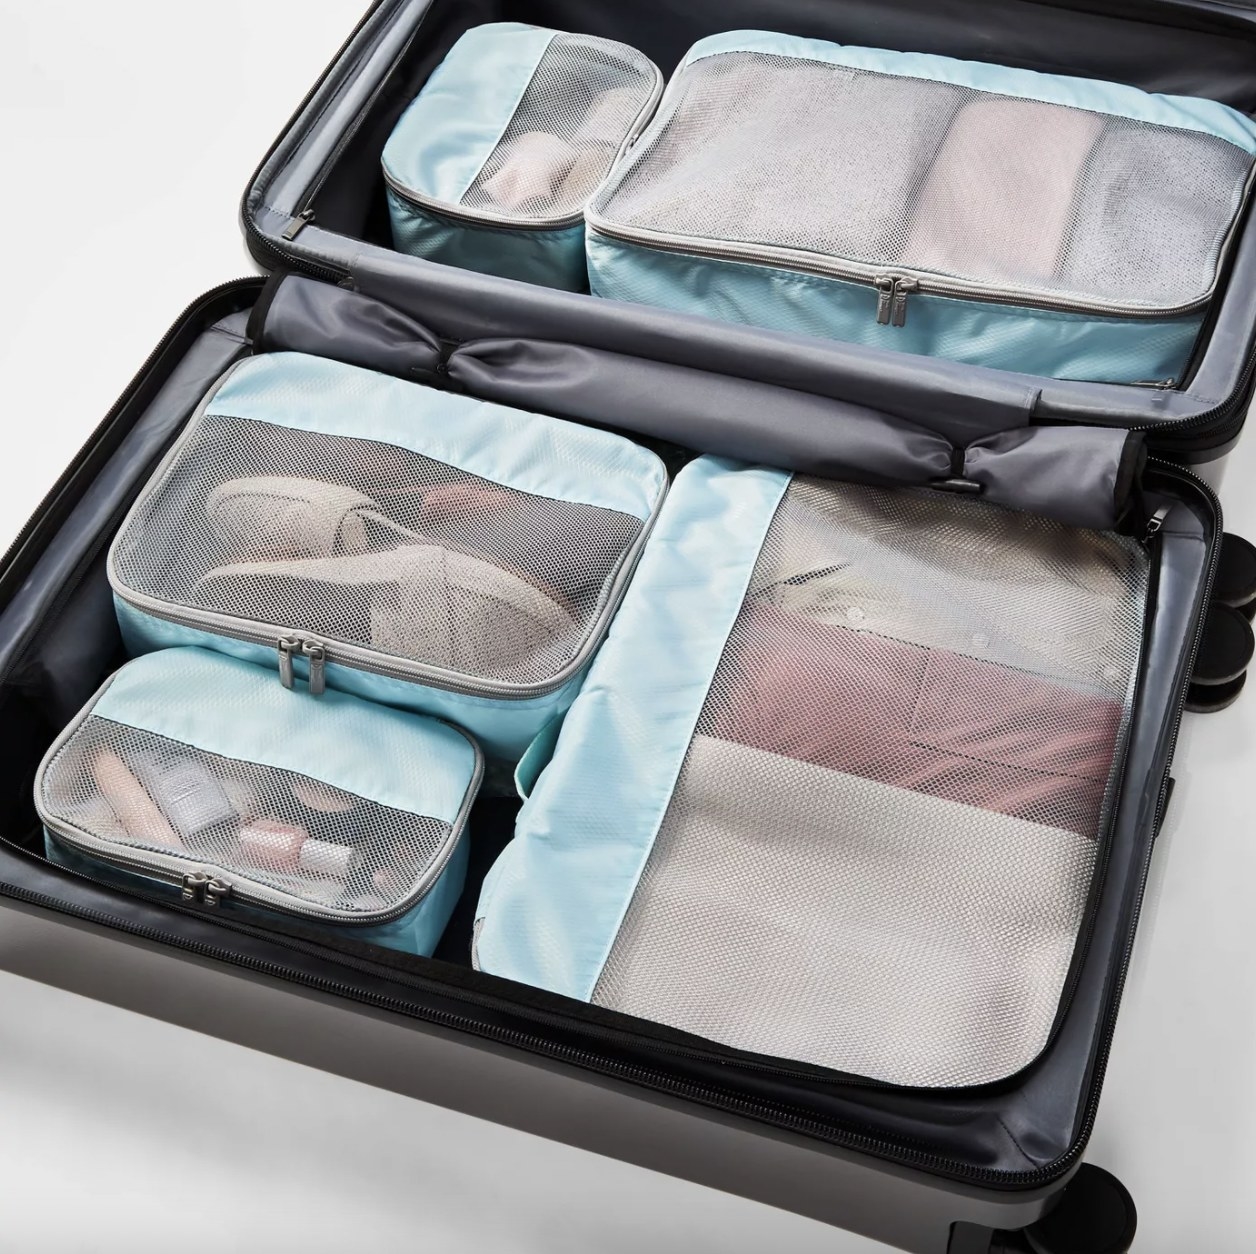 Five packing cubes in a suitcase